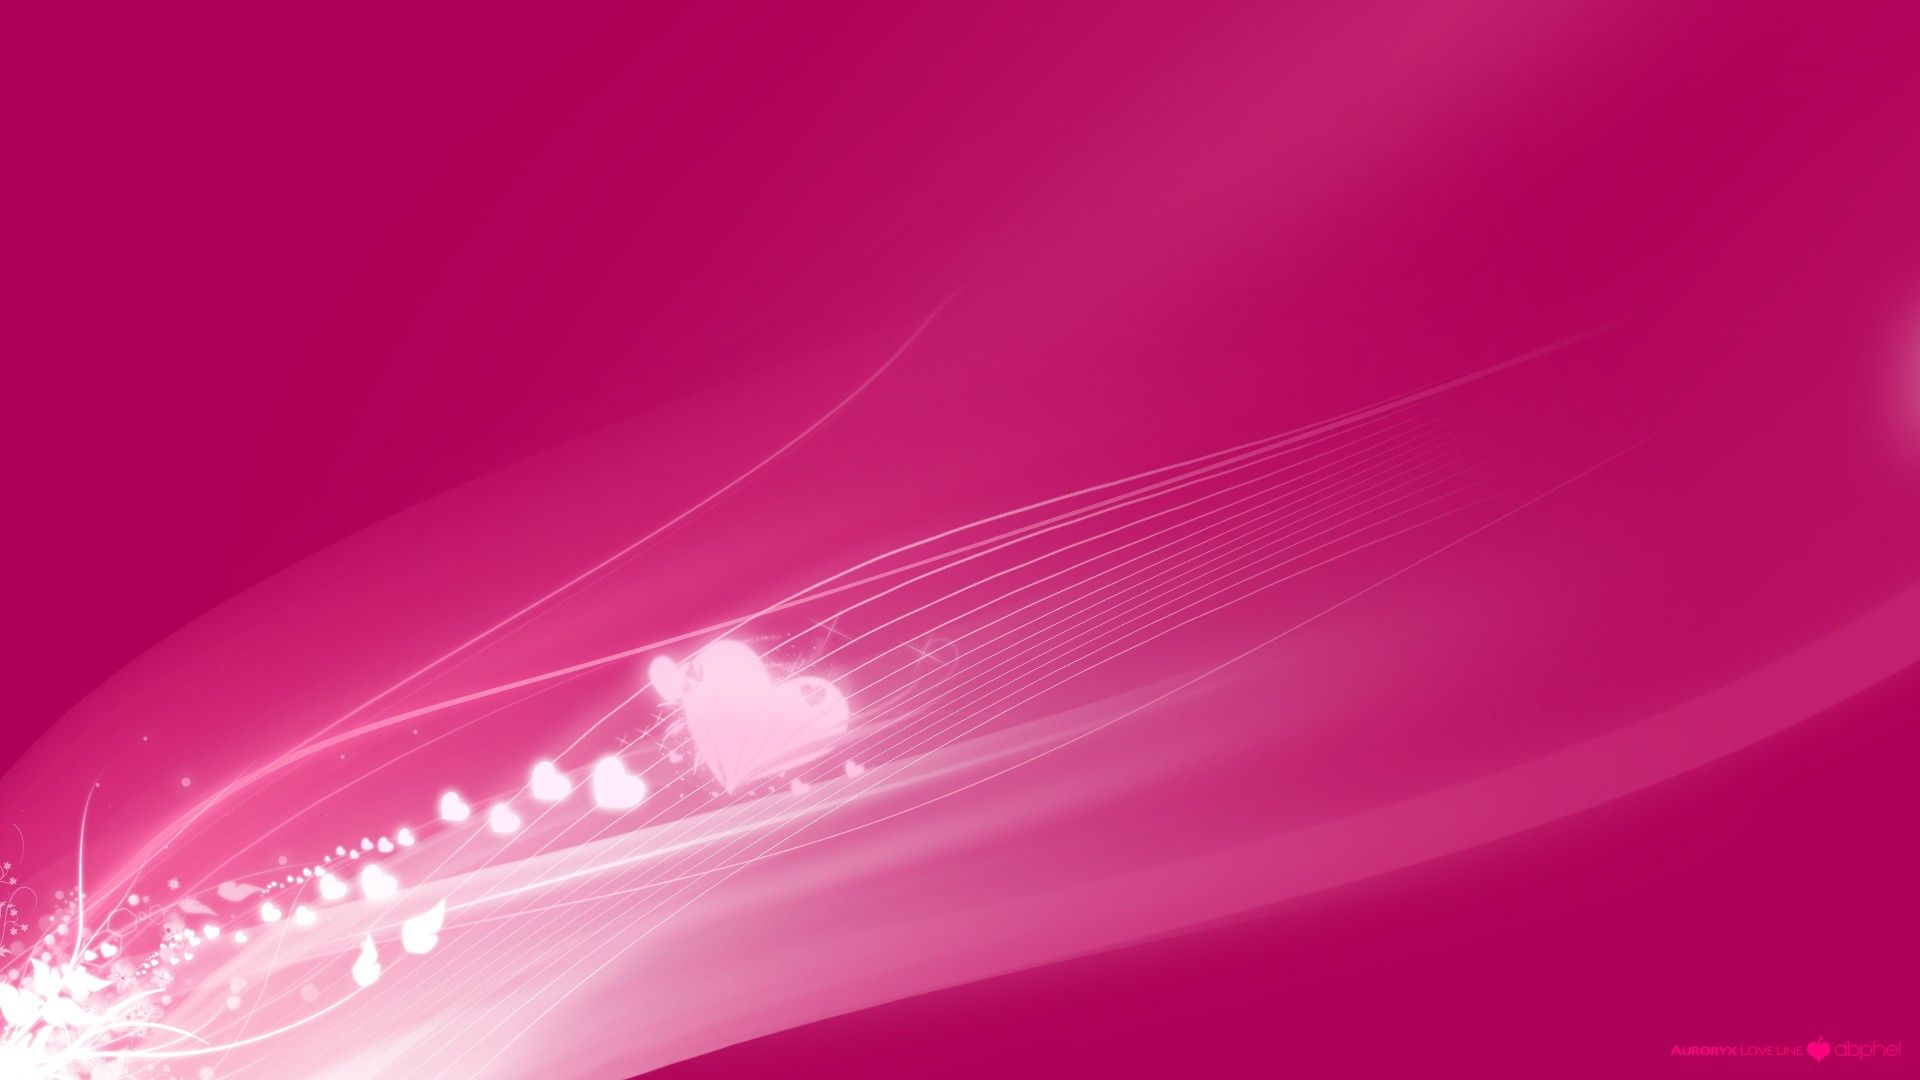 HD Pink Backgrounds Group (76+)